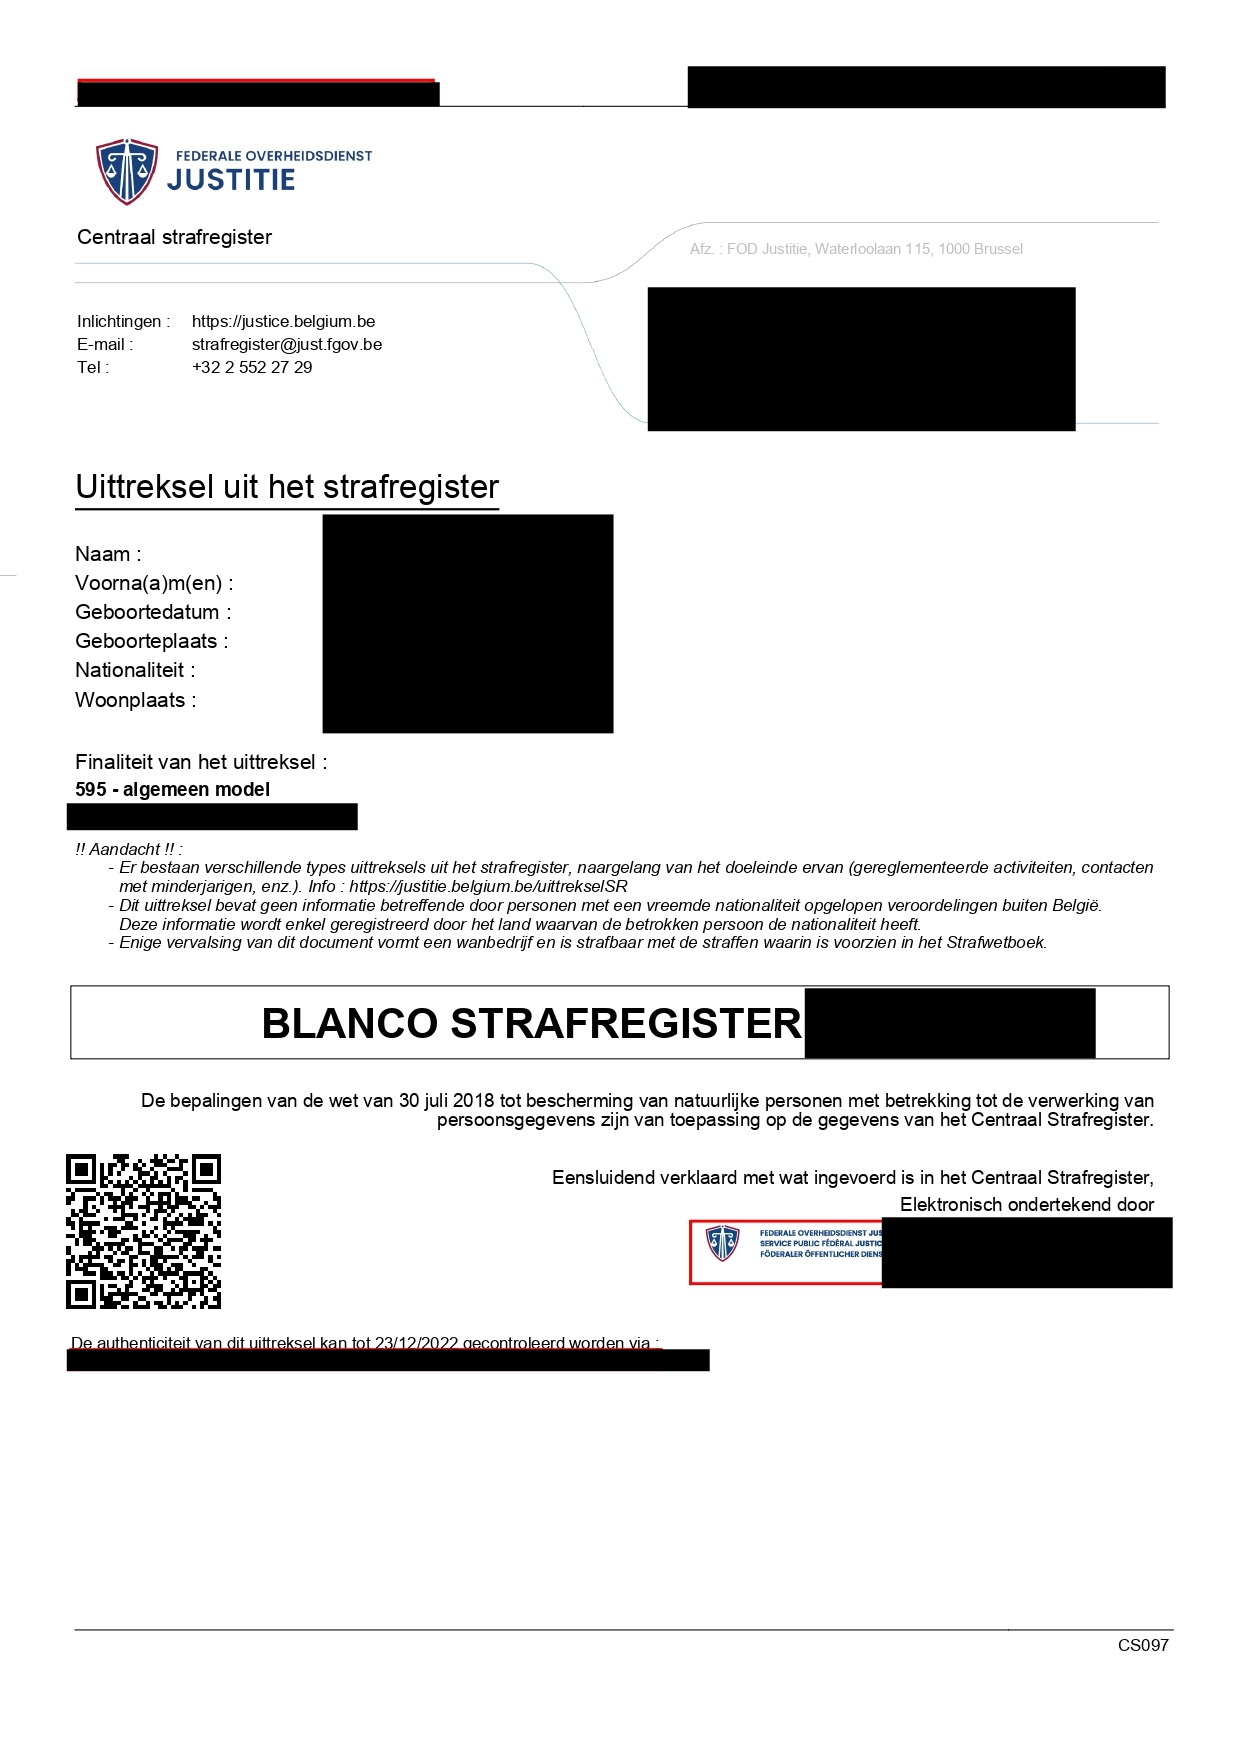 Certified Translation of Belgium Criminal Record from Dutch to English